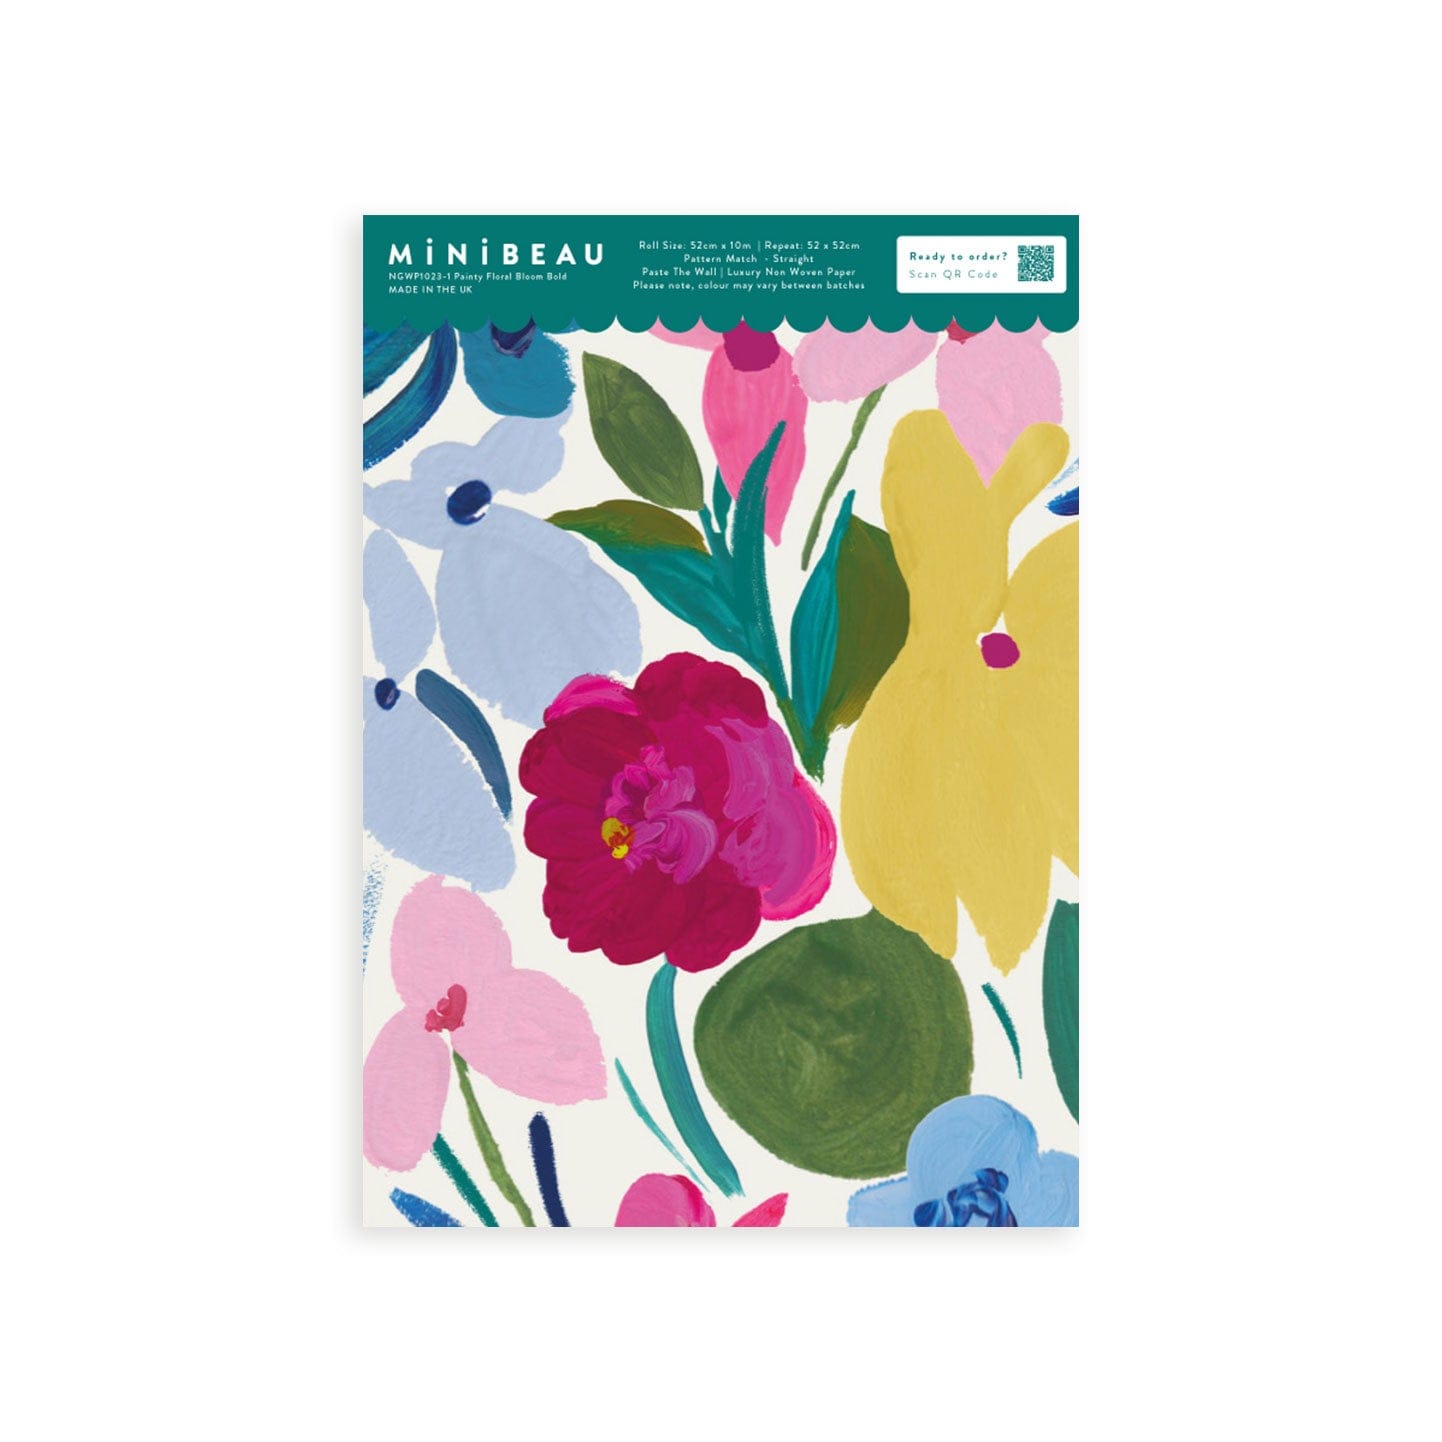 Wallpaper sample of large flowers in yellow, pink, blue and fuchsia with green stalks and leaves.